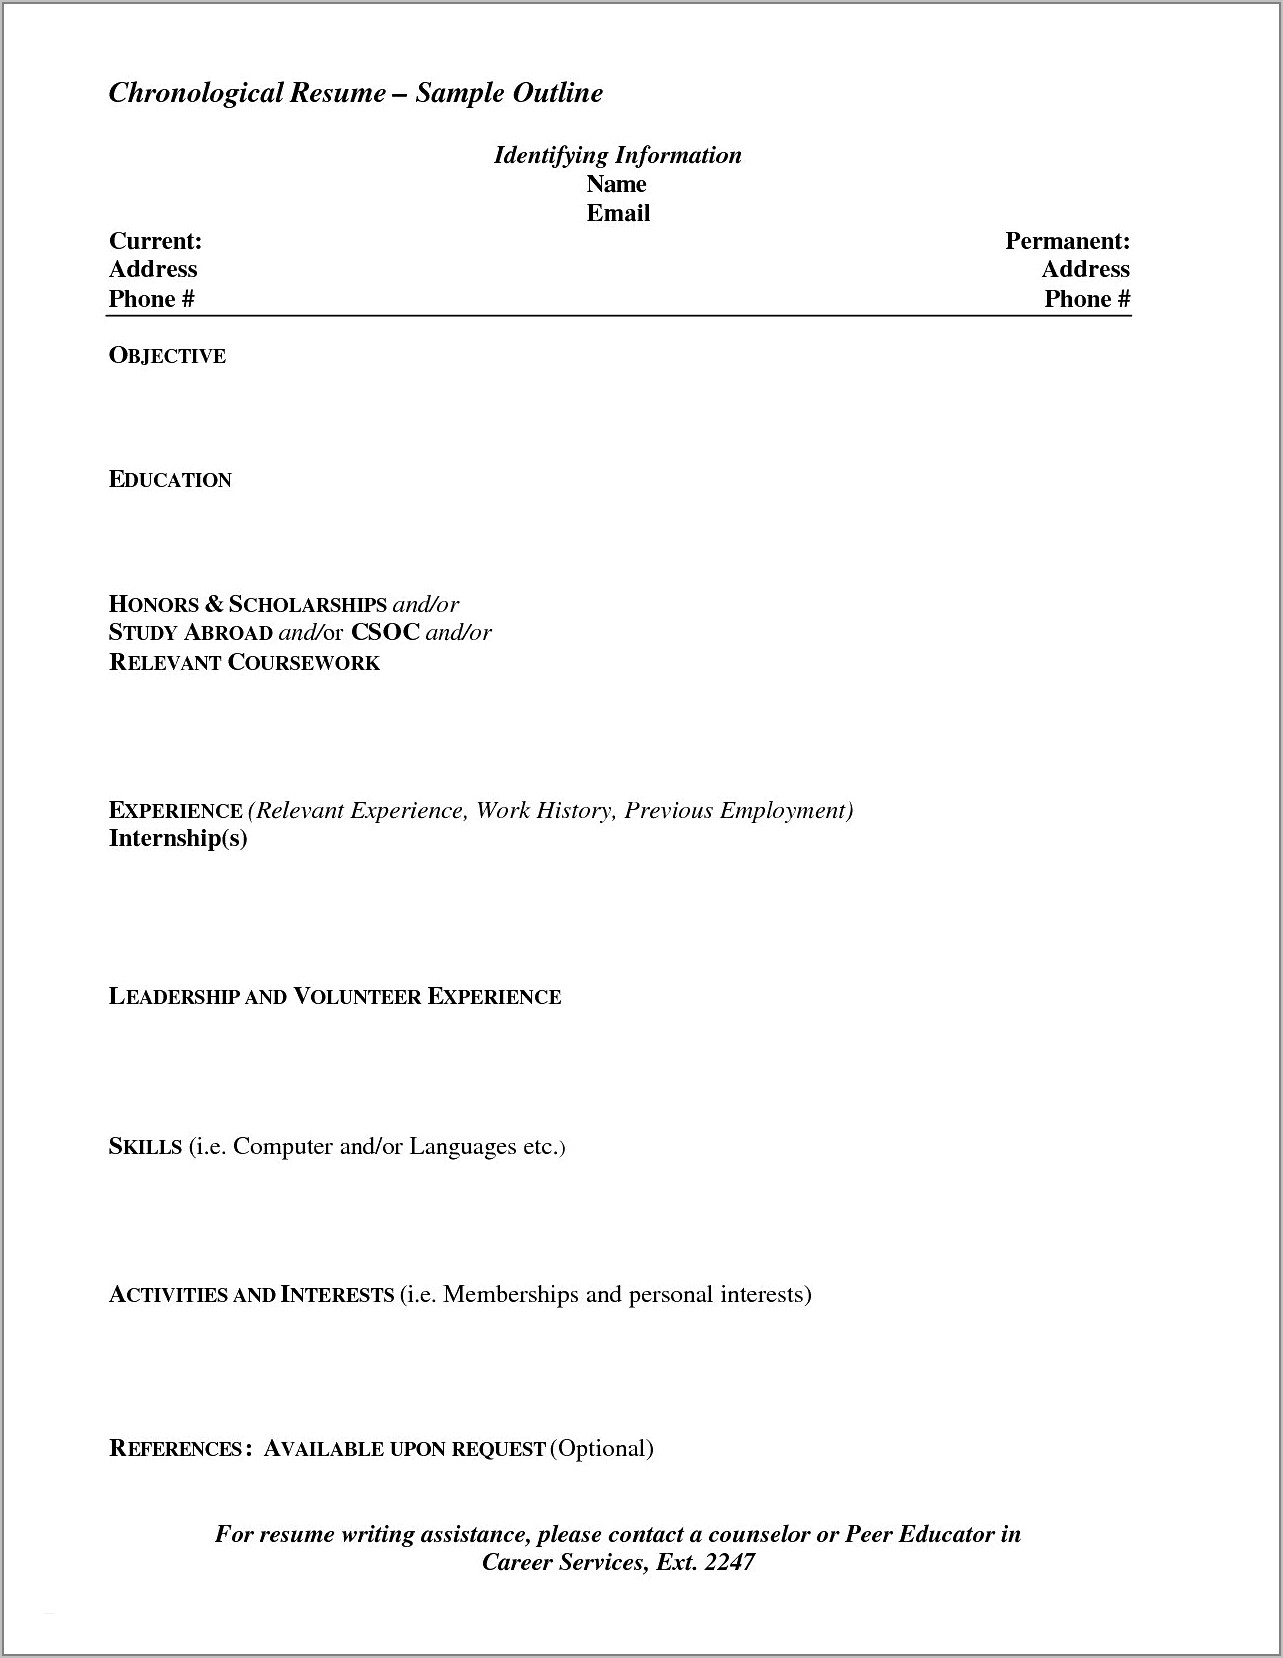 Resume Templates For Word 2016